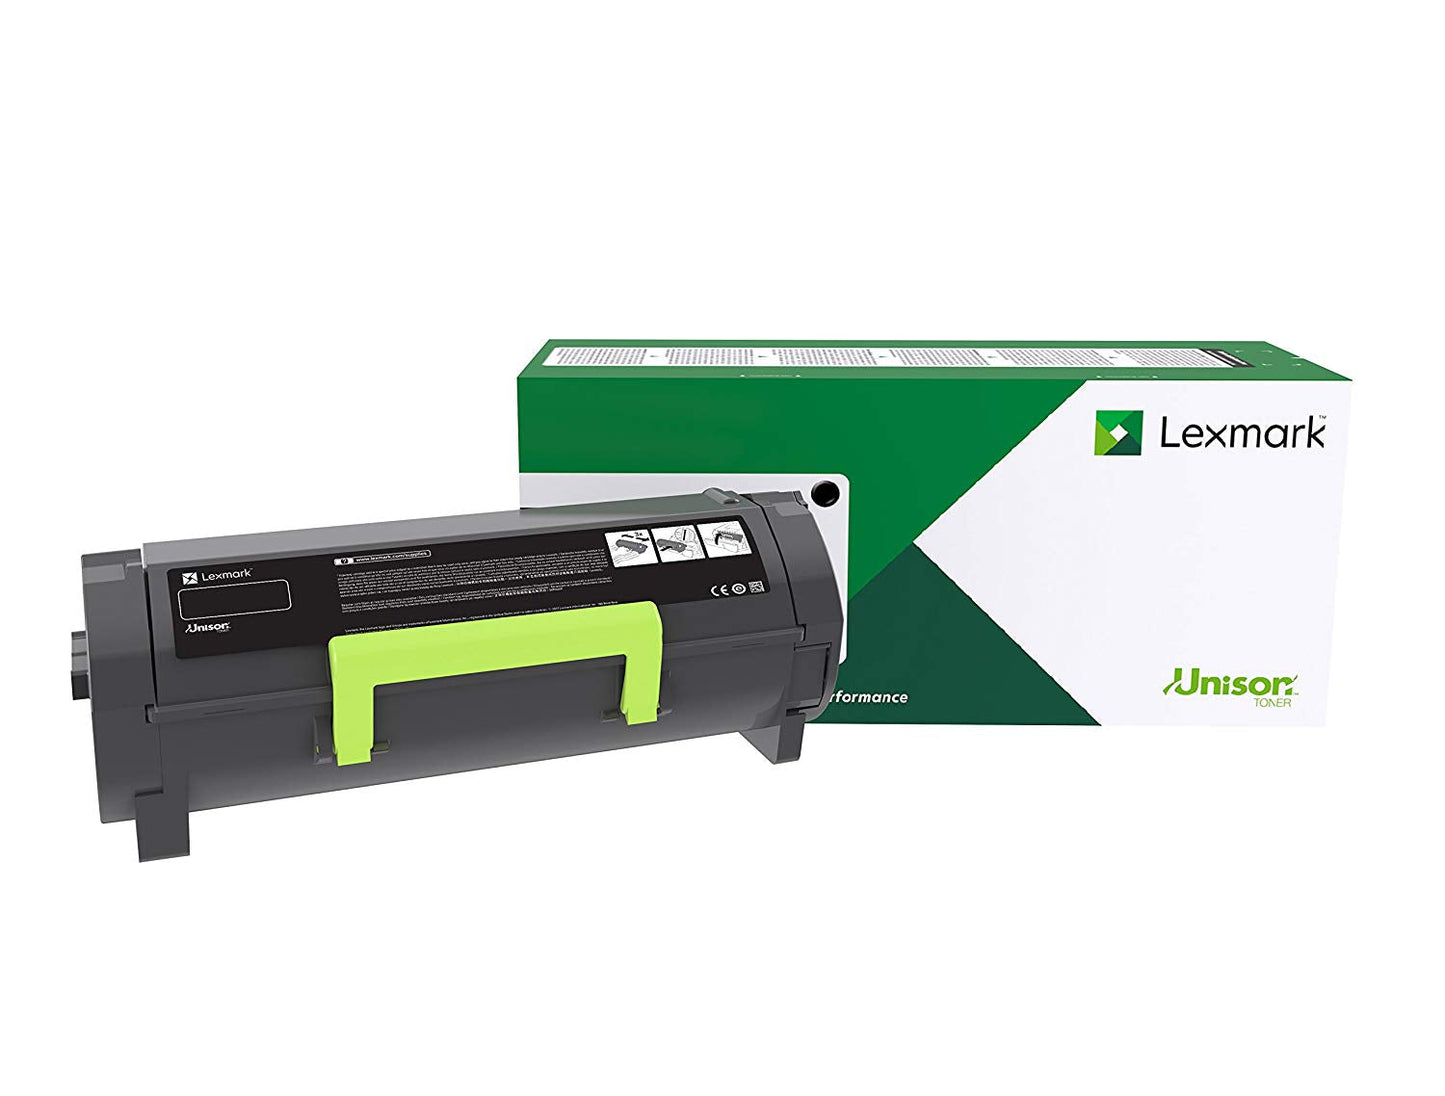 OEM Lexmark 56F1X00 Extra High Yield Toner Cartridge for MS421, MS521, MS621, MS622, MX421, MX521, MX522, MX622 [20,000 Pages]